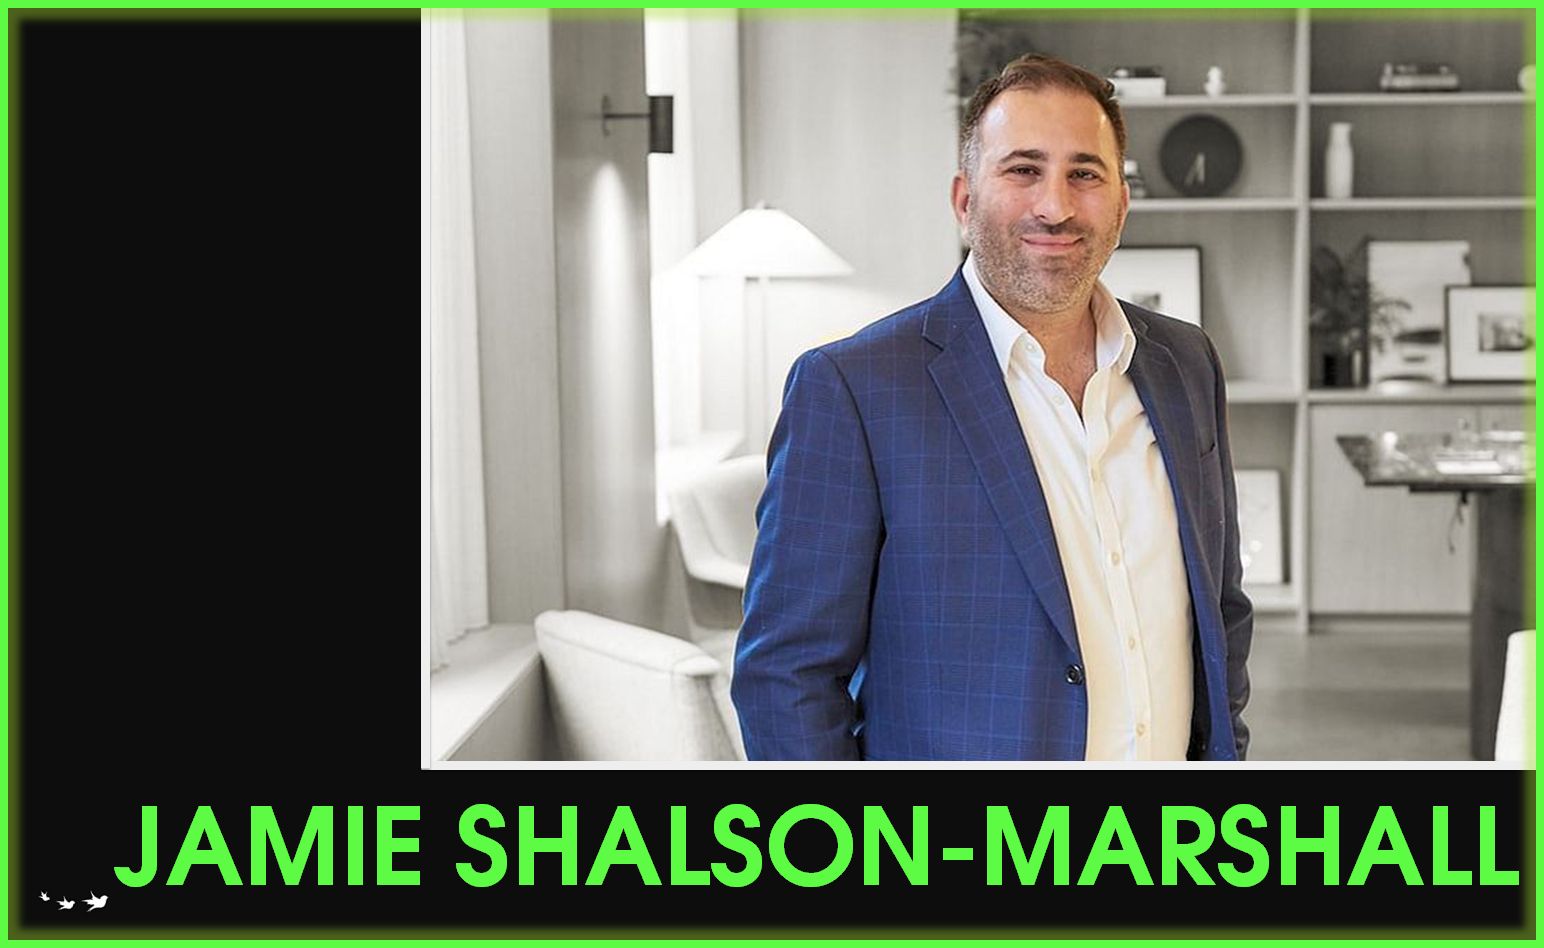 Jamie Shalson Marshall sonhaus homes podcast interview business travel website